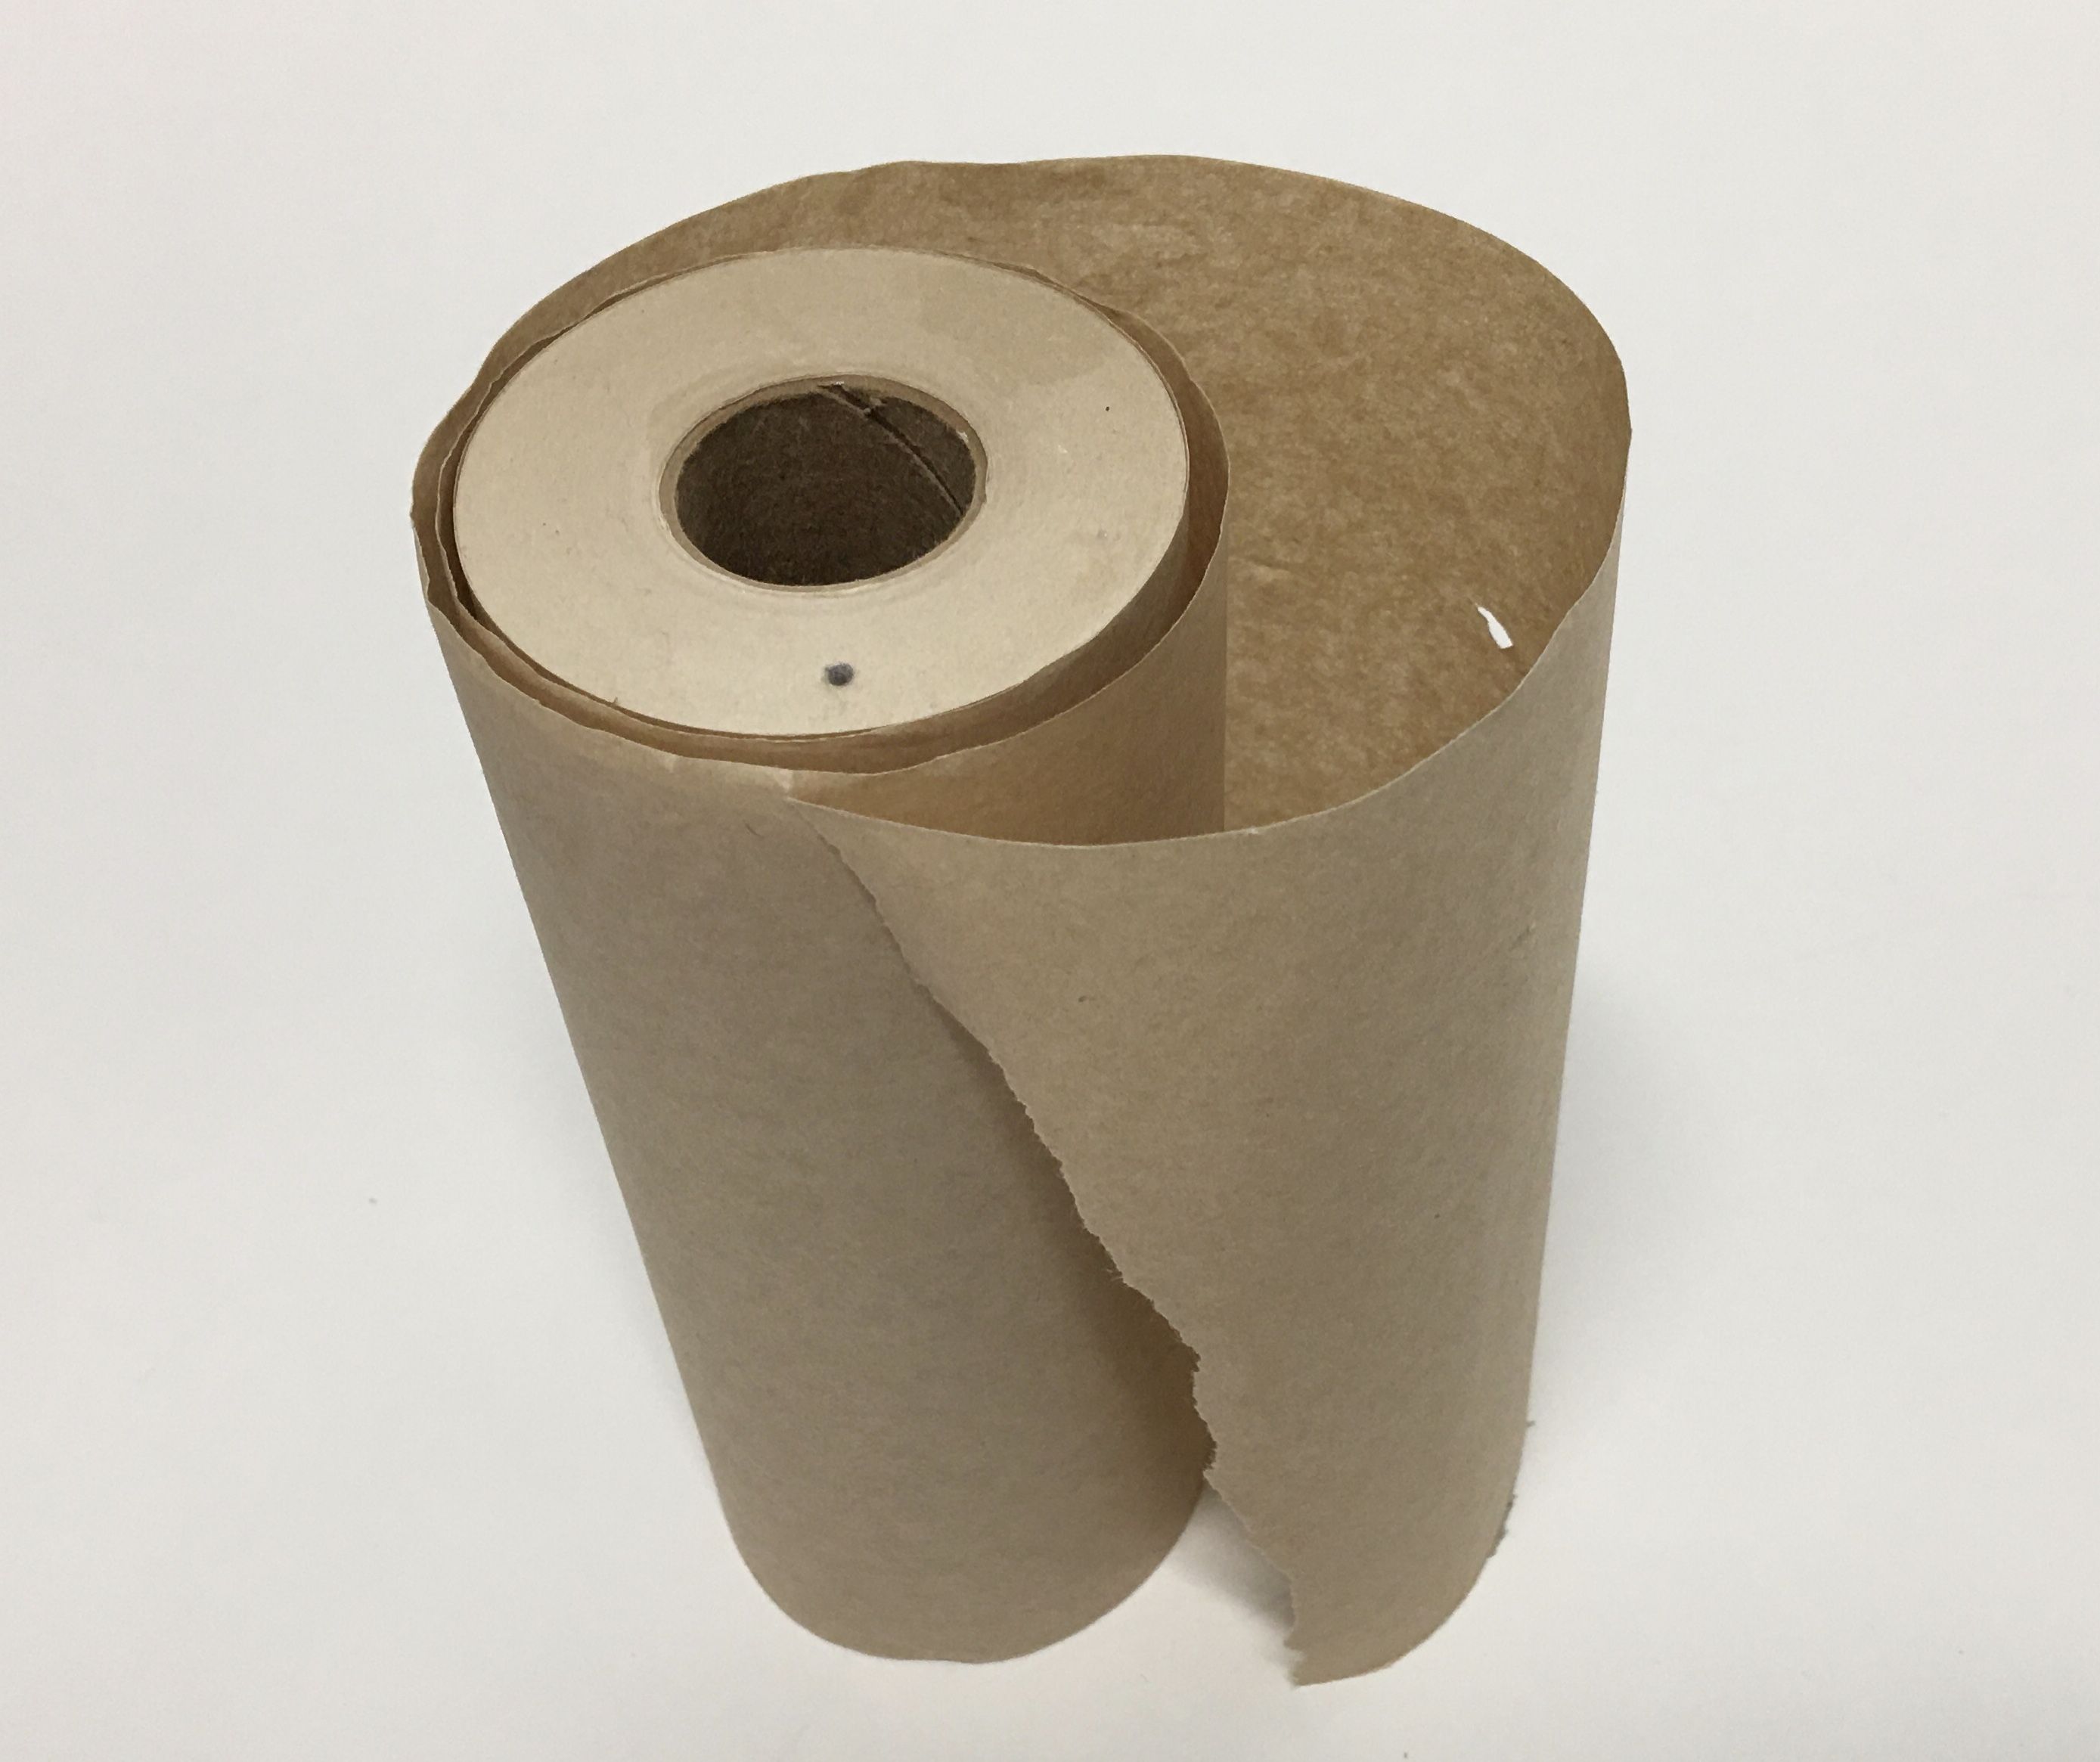 Butcher Paper Rolls, White, 12 Wide for $29.64 Online